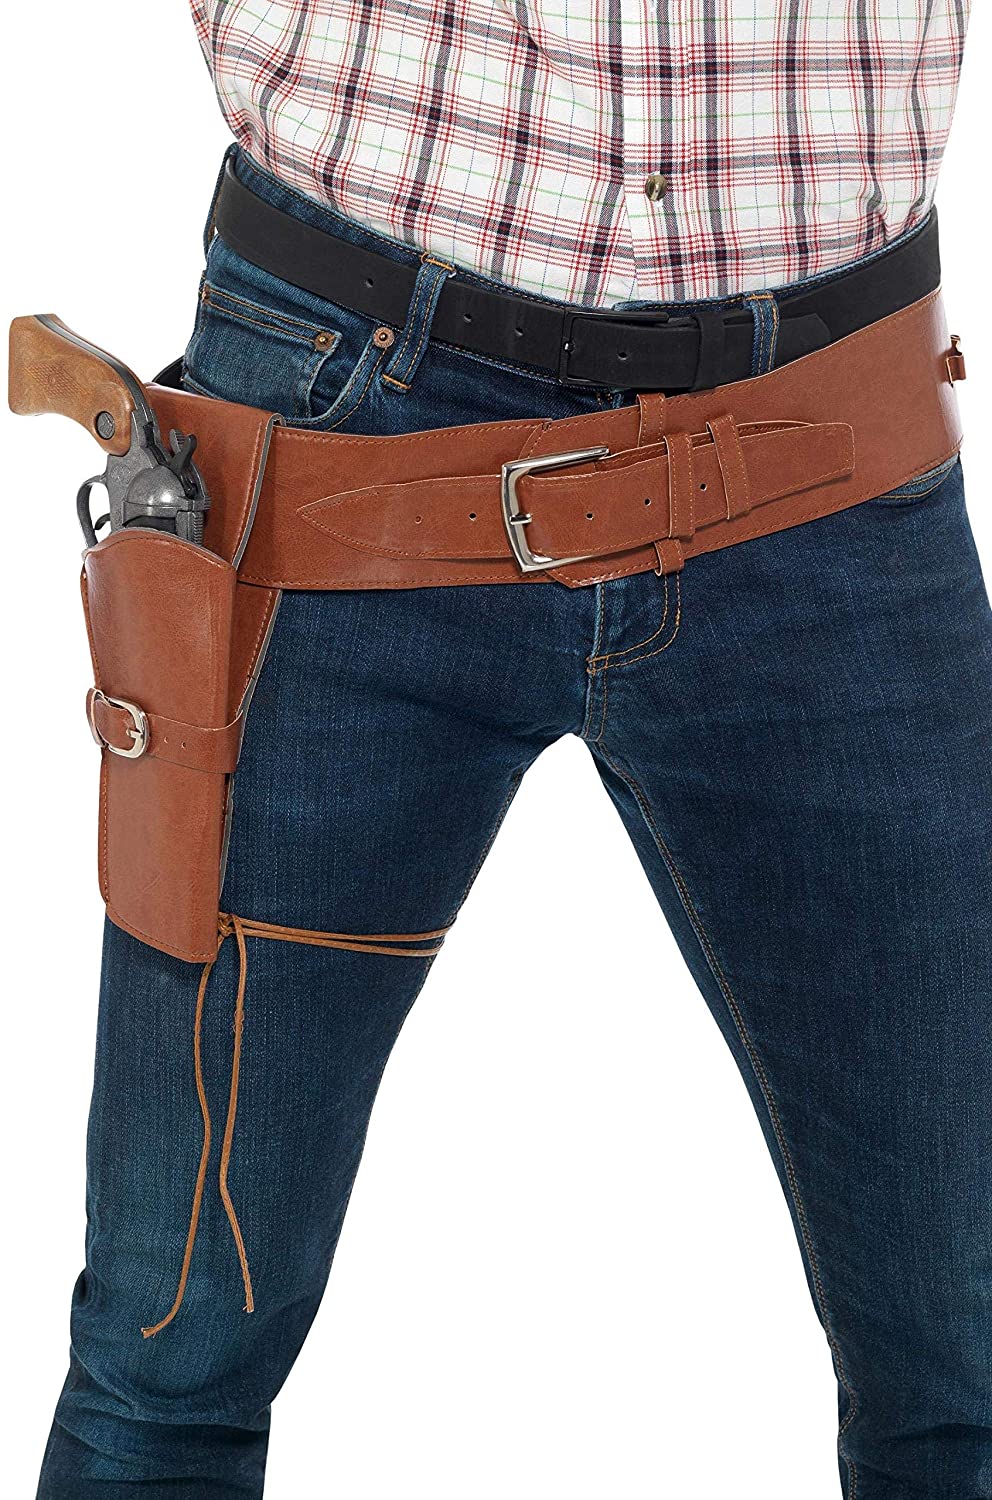 Smiffy's Faux Leather Single Holster with Belt, Unisex-Adult, One Size